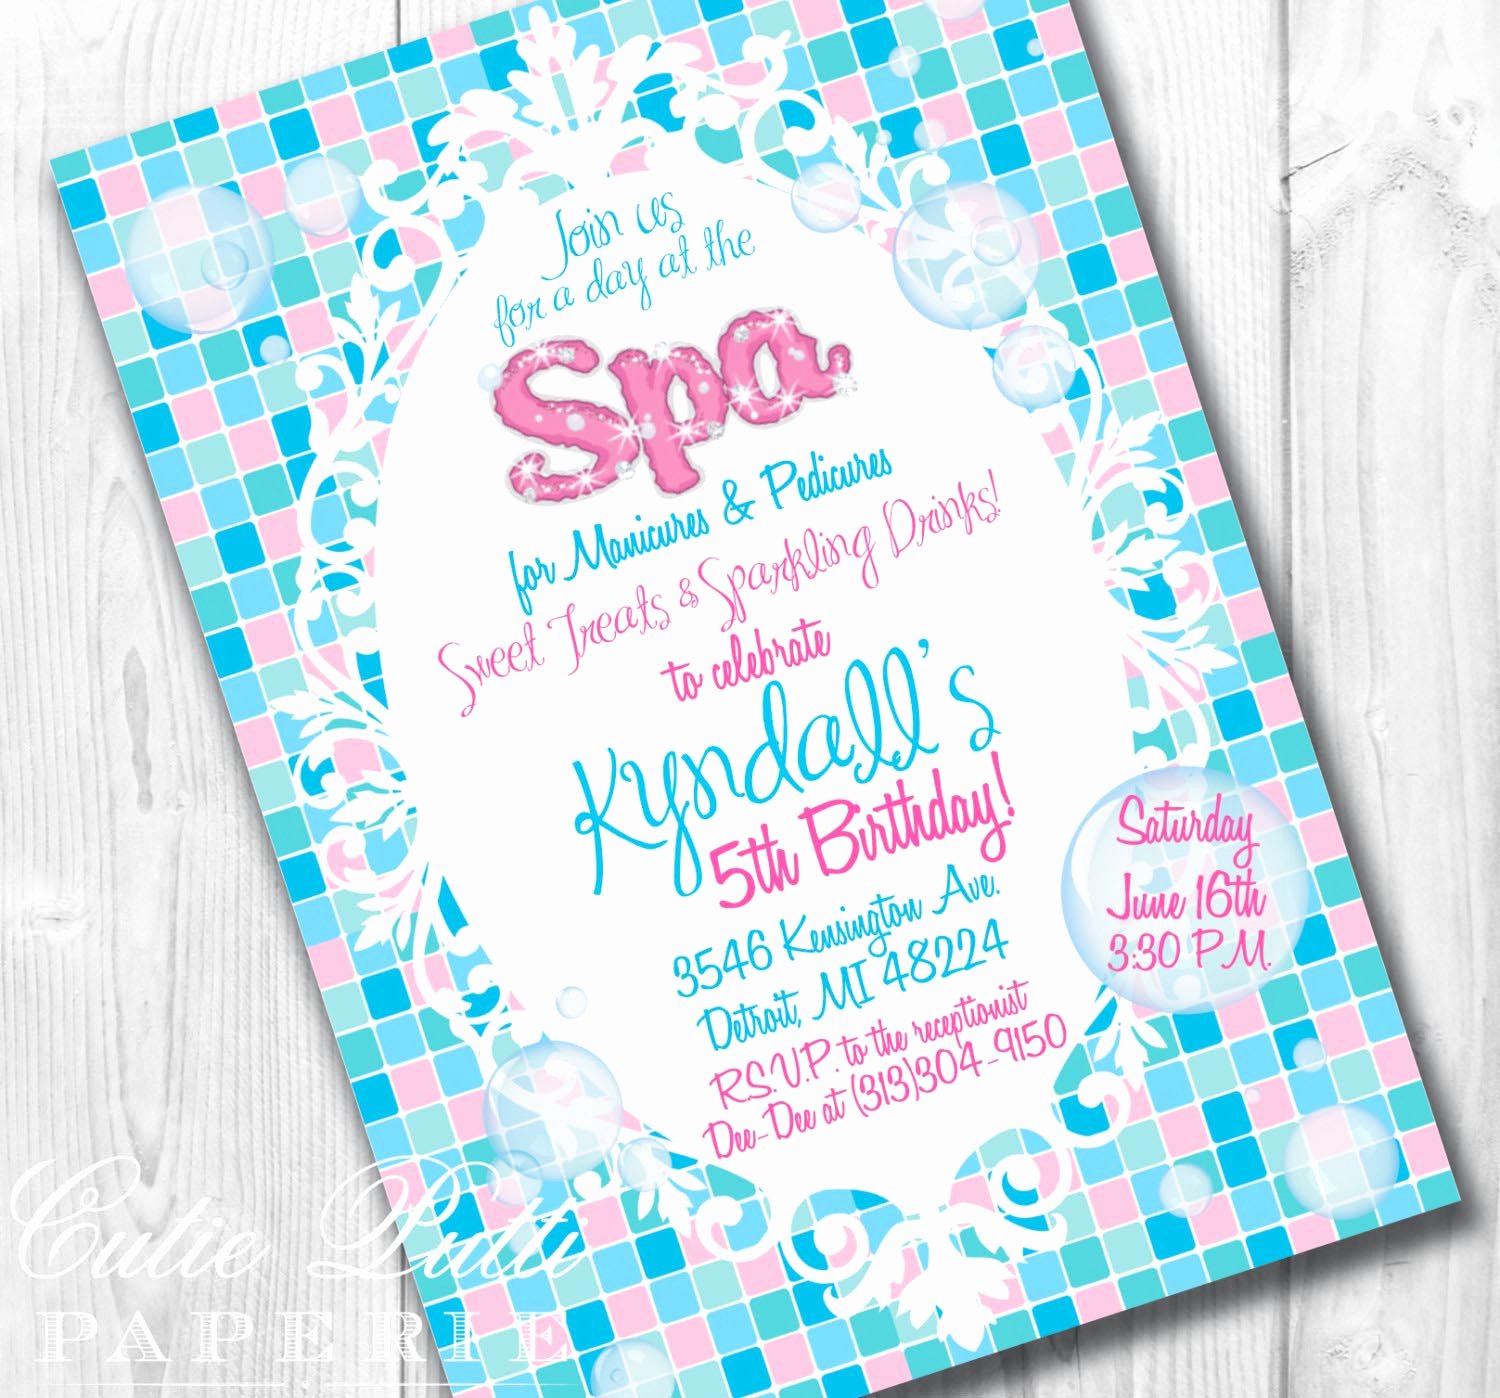 Making Spa Party Invitations